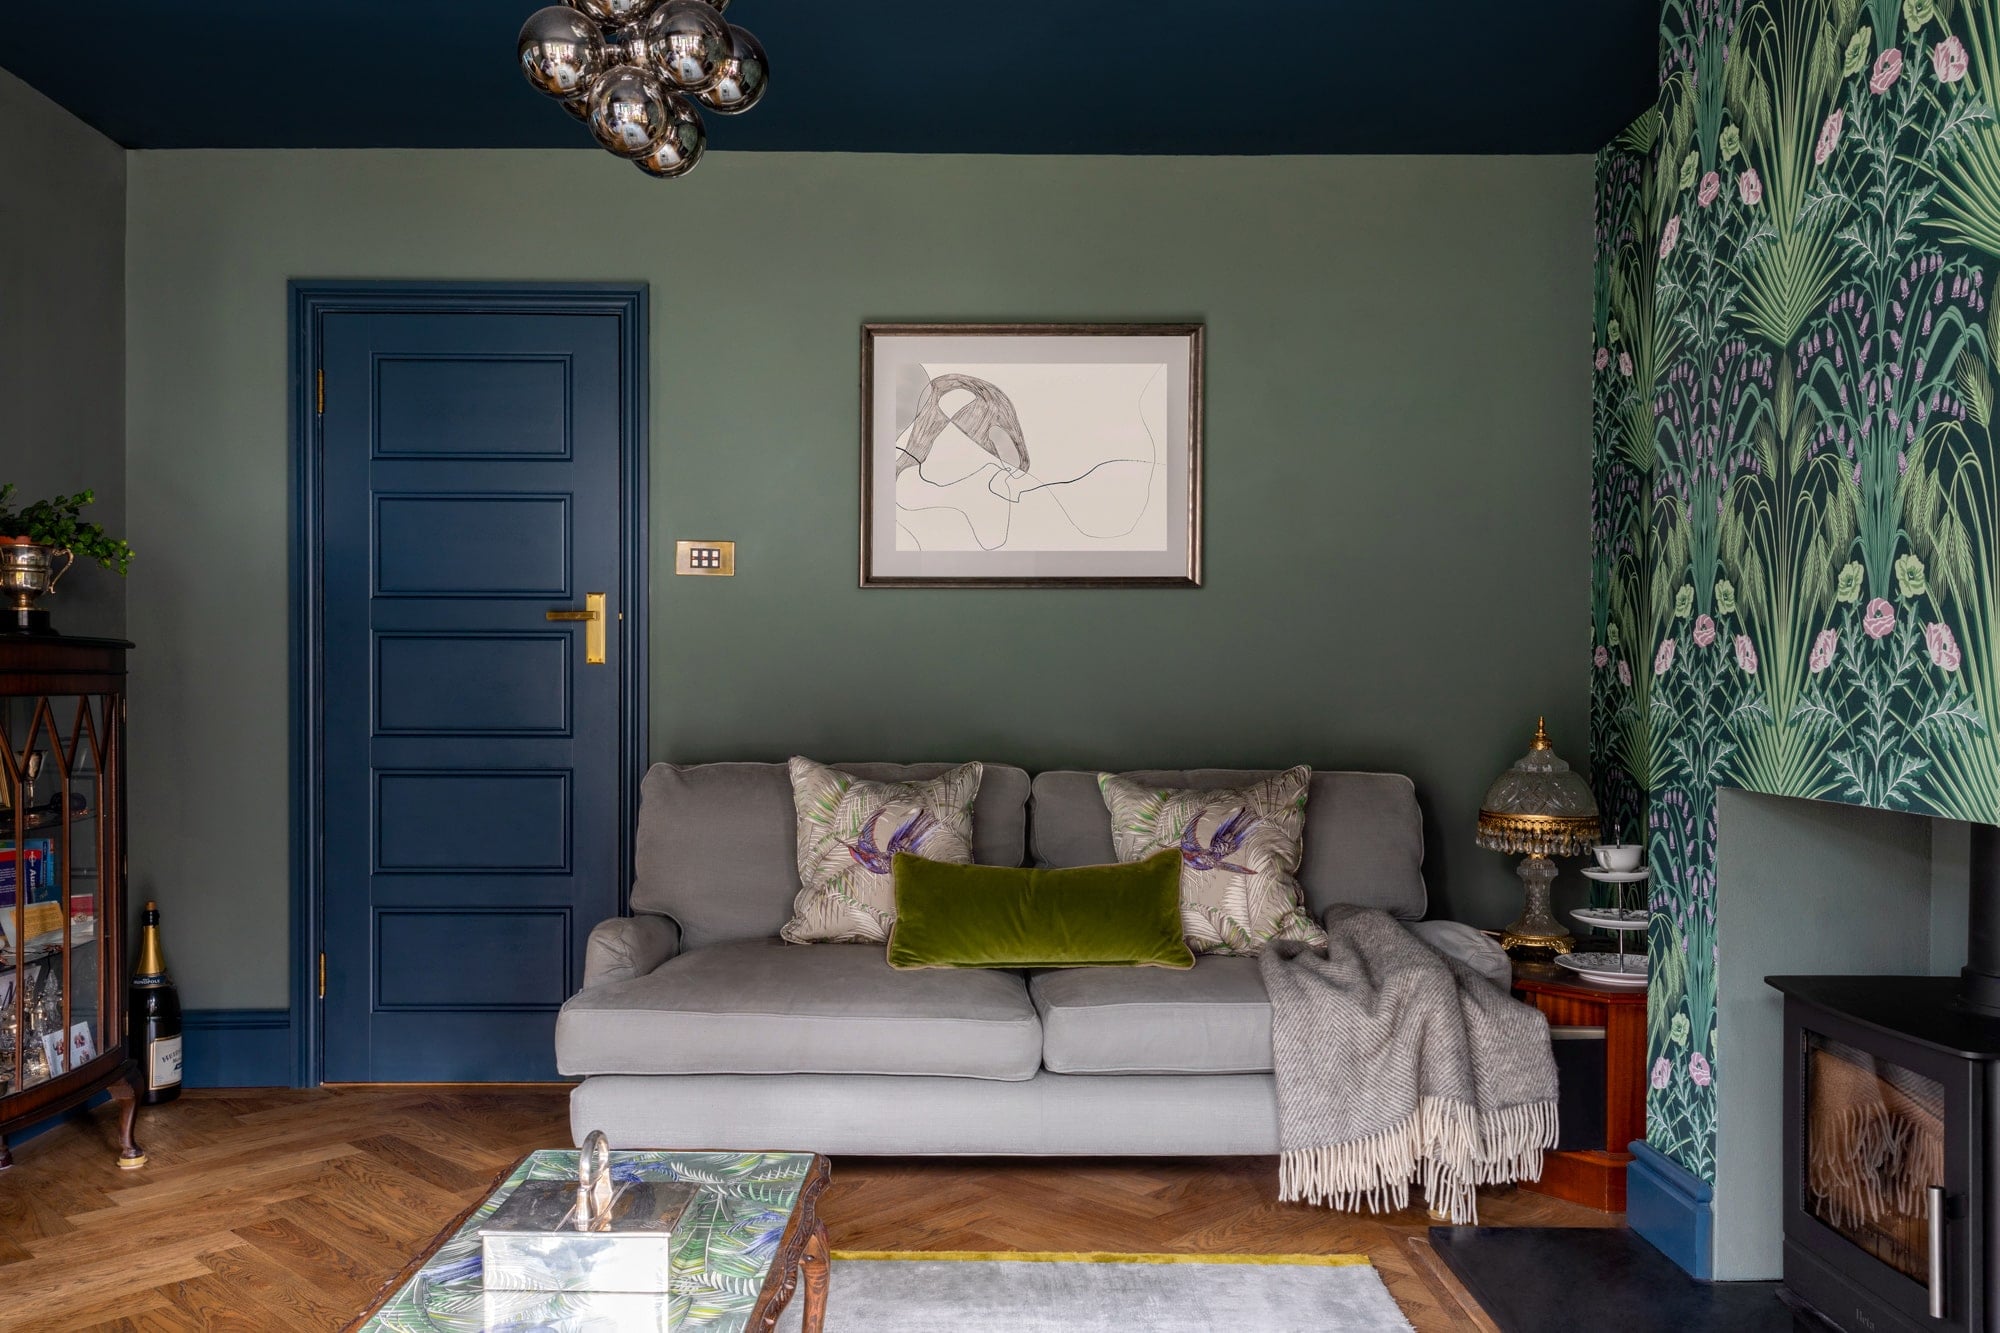 Sitting room with eclectic vibrant wallpaper, fireplace, blue and green colour scheme